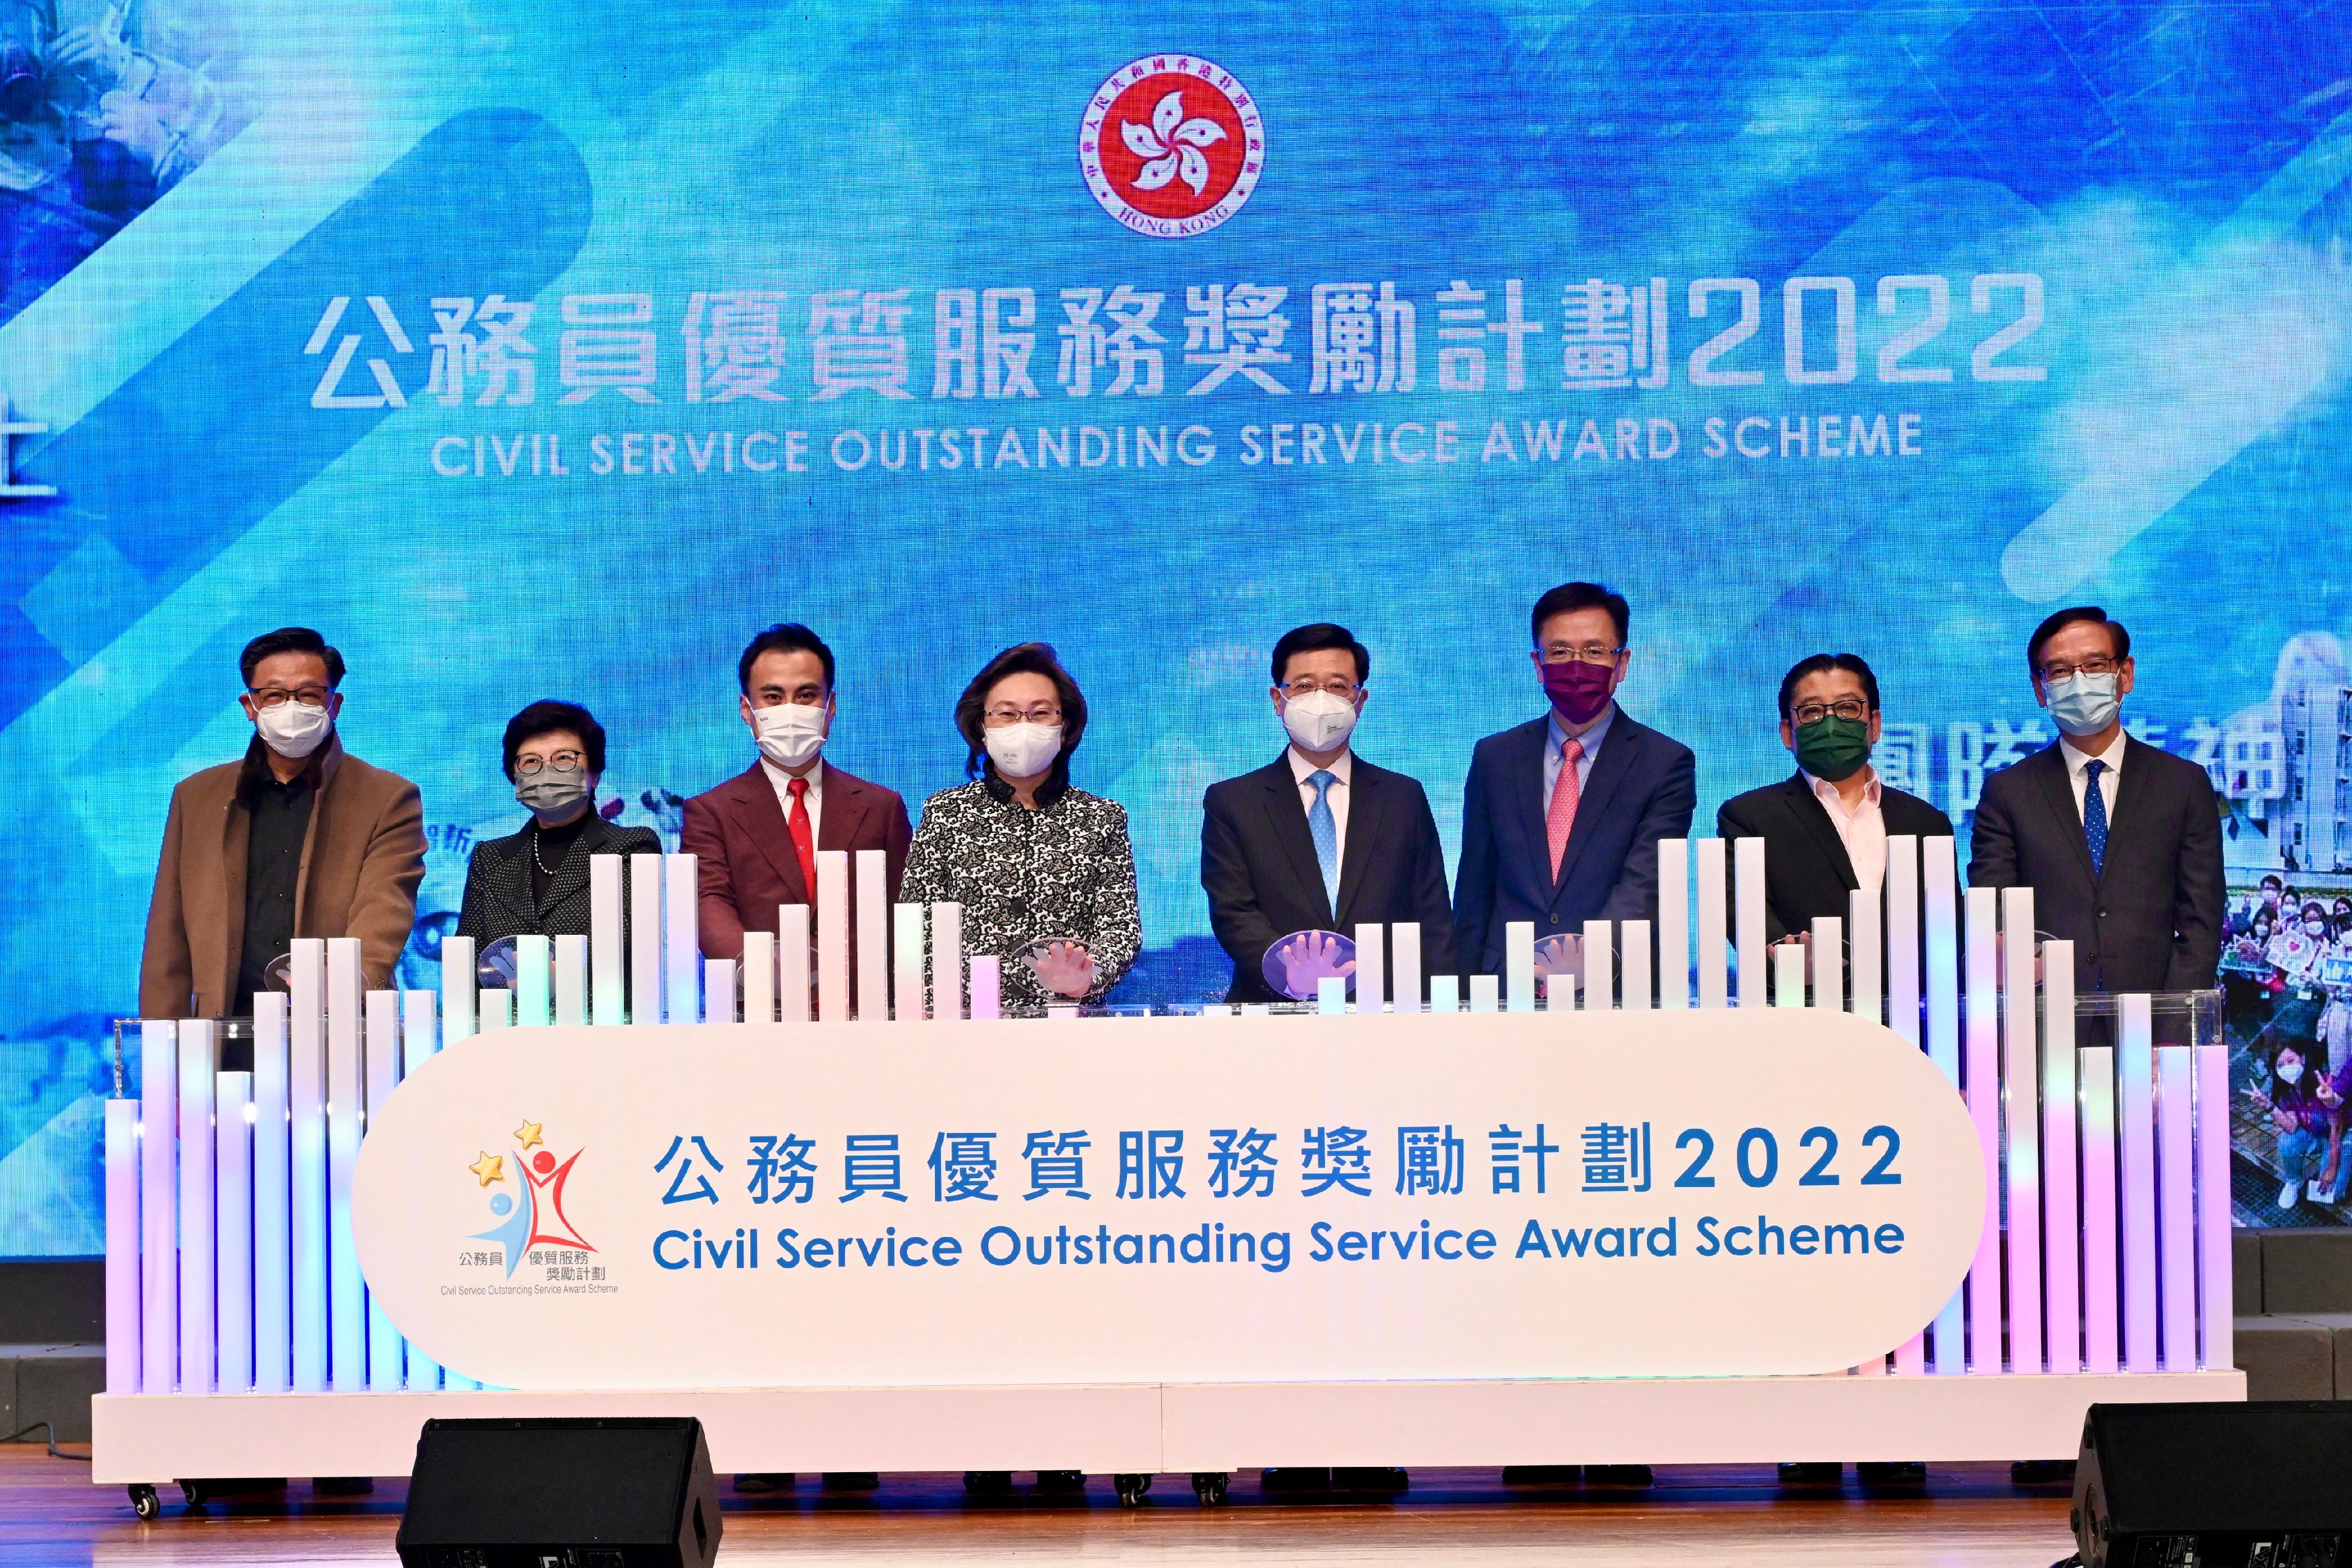 The Chief Executive, Mr John Lee, attends the prize presentation ceremony of the Civil Service Outstanding Service Award Scheme 2022 at the Hong Kong Convention and Exhibition Centre this afternoon (December 12). Photo shows (from fourth left) the Secretary for the Civil Service, Mrs Ingrid Yeung; Mr Lee; the Secretary for Innovation, Technology and Industry, Professor Sun Dong, and other guests at the event.